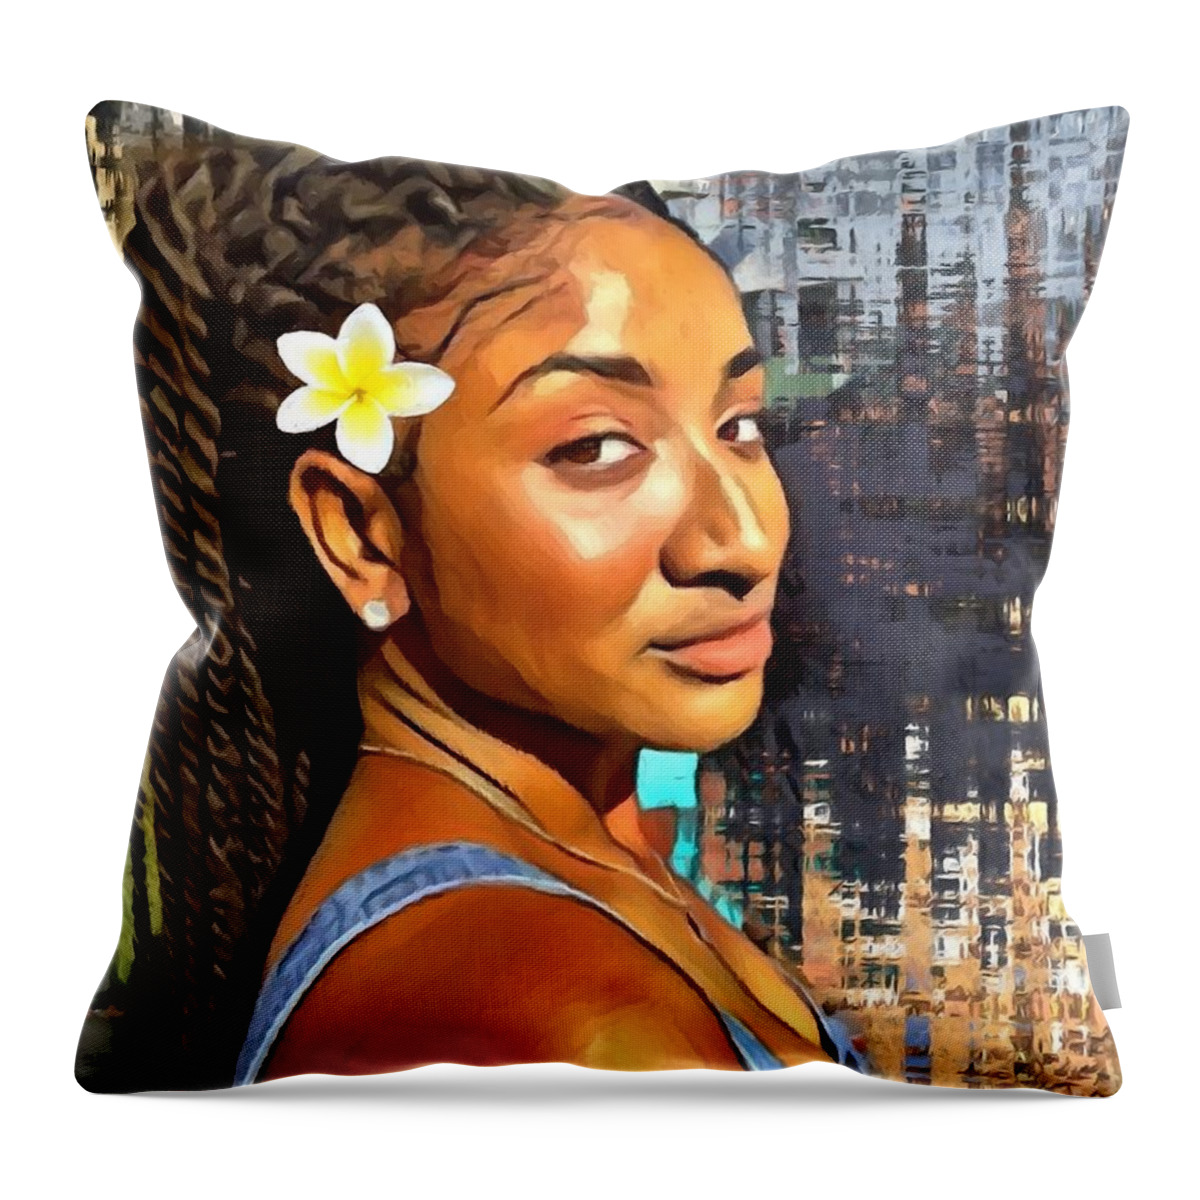 Beautiful Throw Pillow featuring the mixed media Your Smile by Carl Gouveia